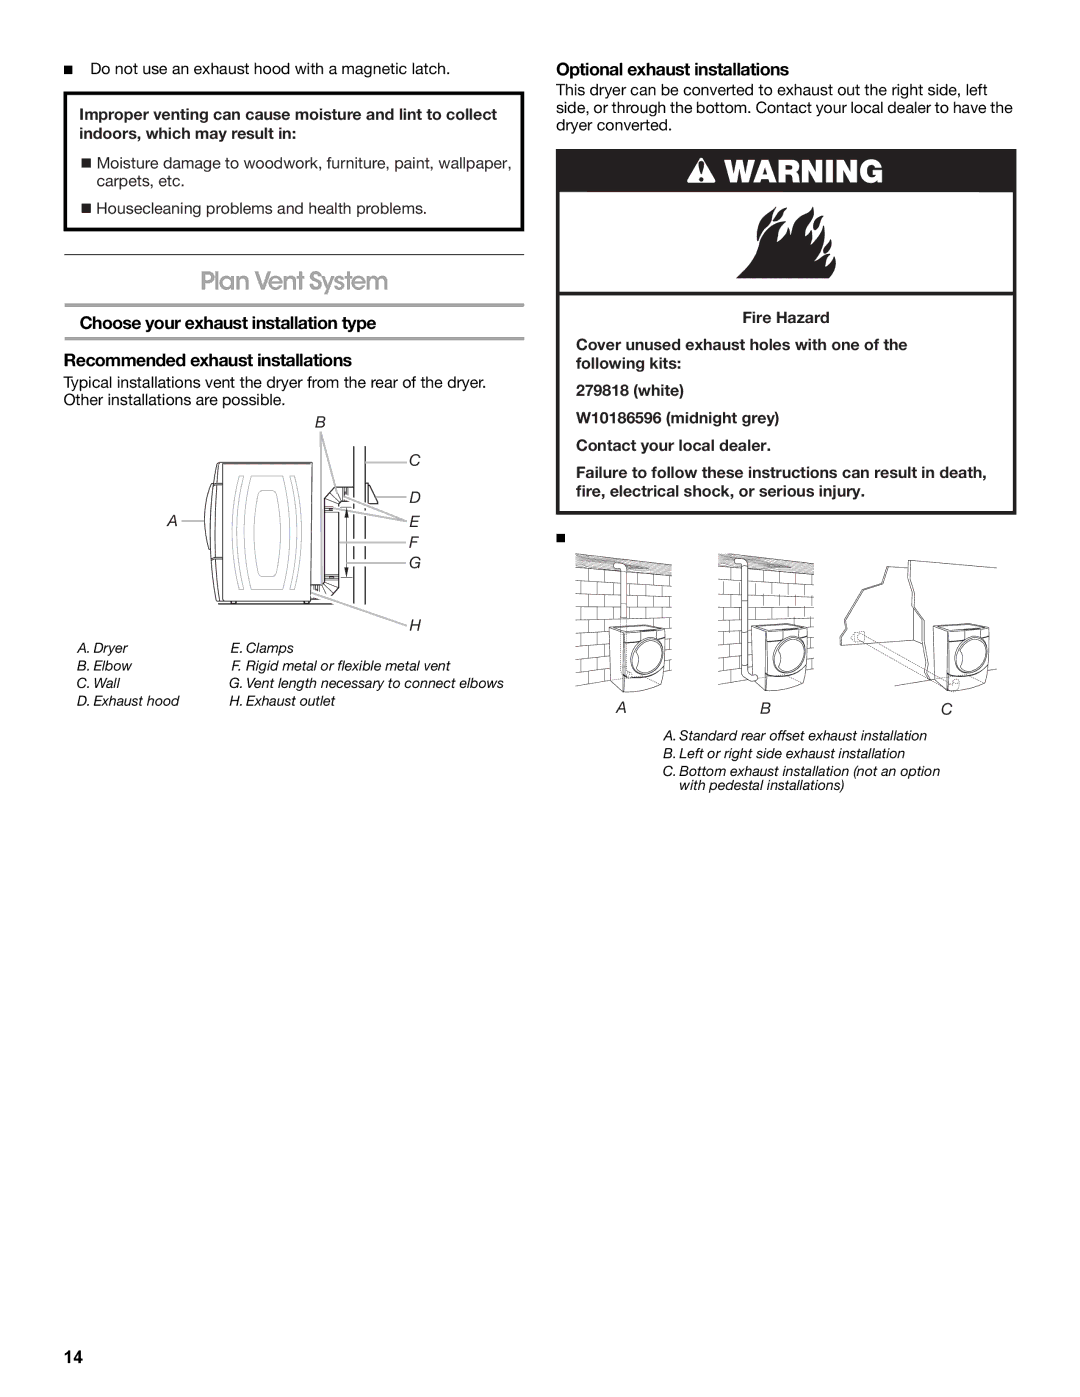 Amana W10233410A manual Plan Vent System, Optional exhaust installations, Do not use an exhaust hood with a magnetic latch 